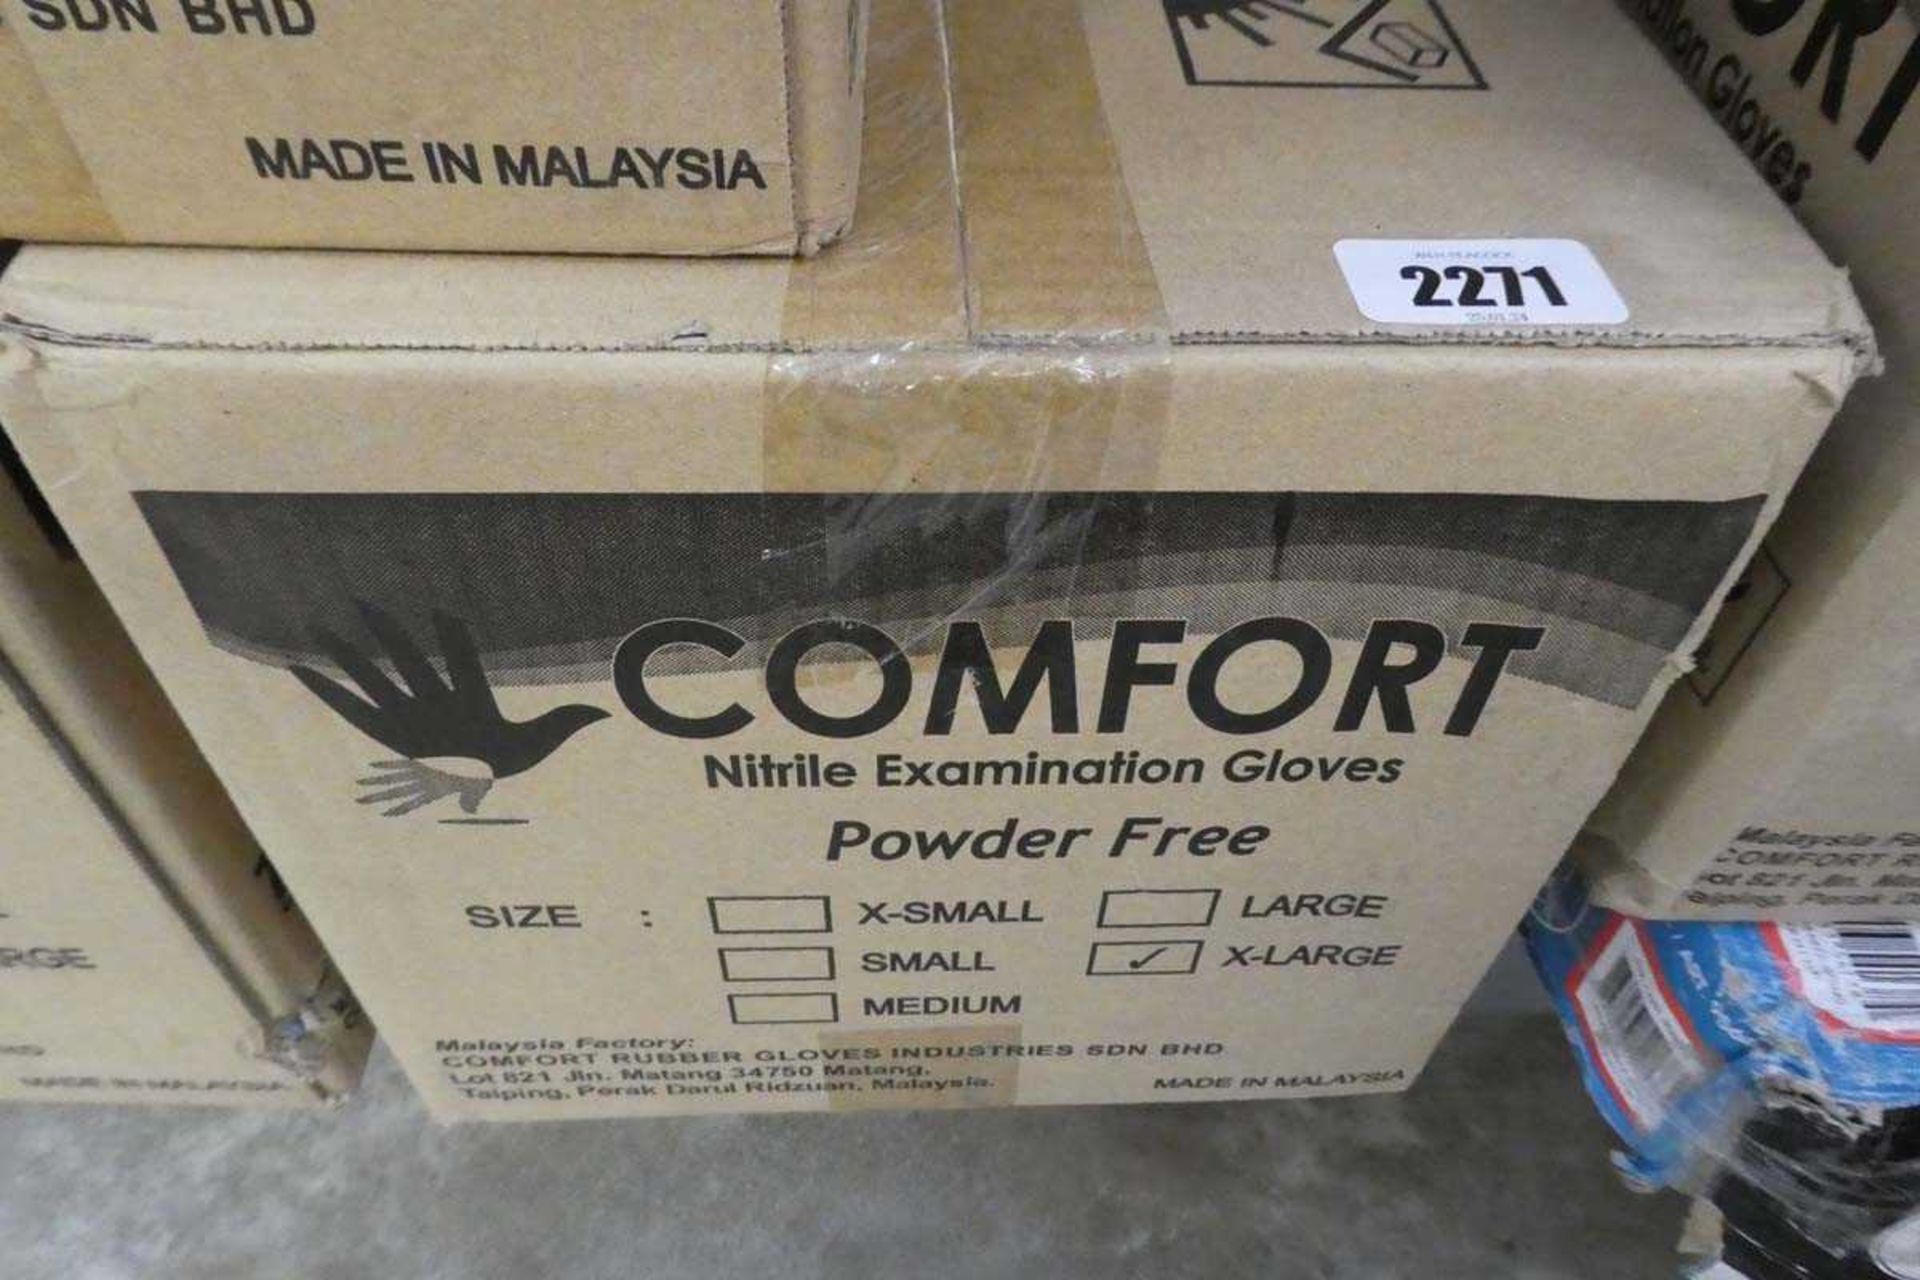 Box containing 10 packs of Comfort Nitrile powder-free disposable gloves (size XL)